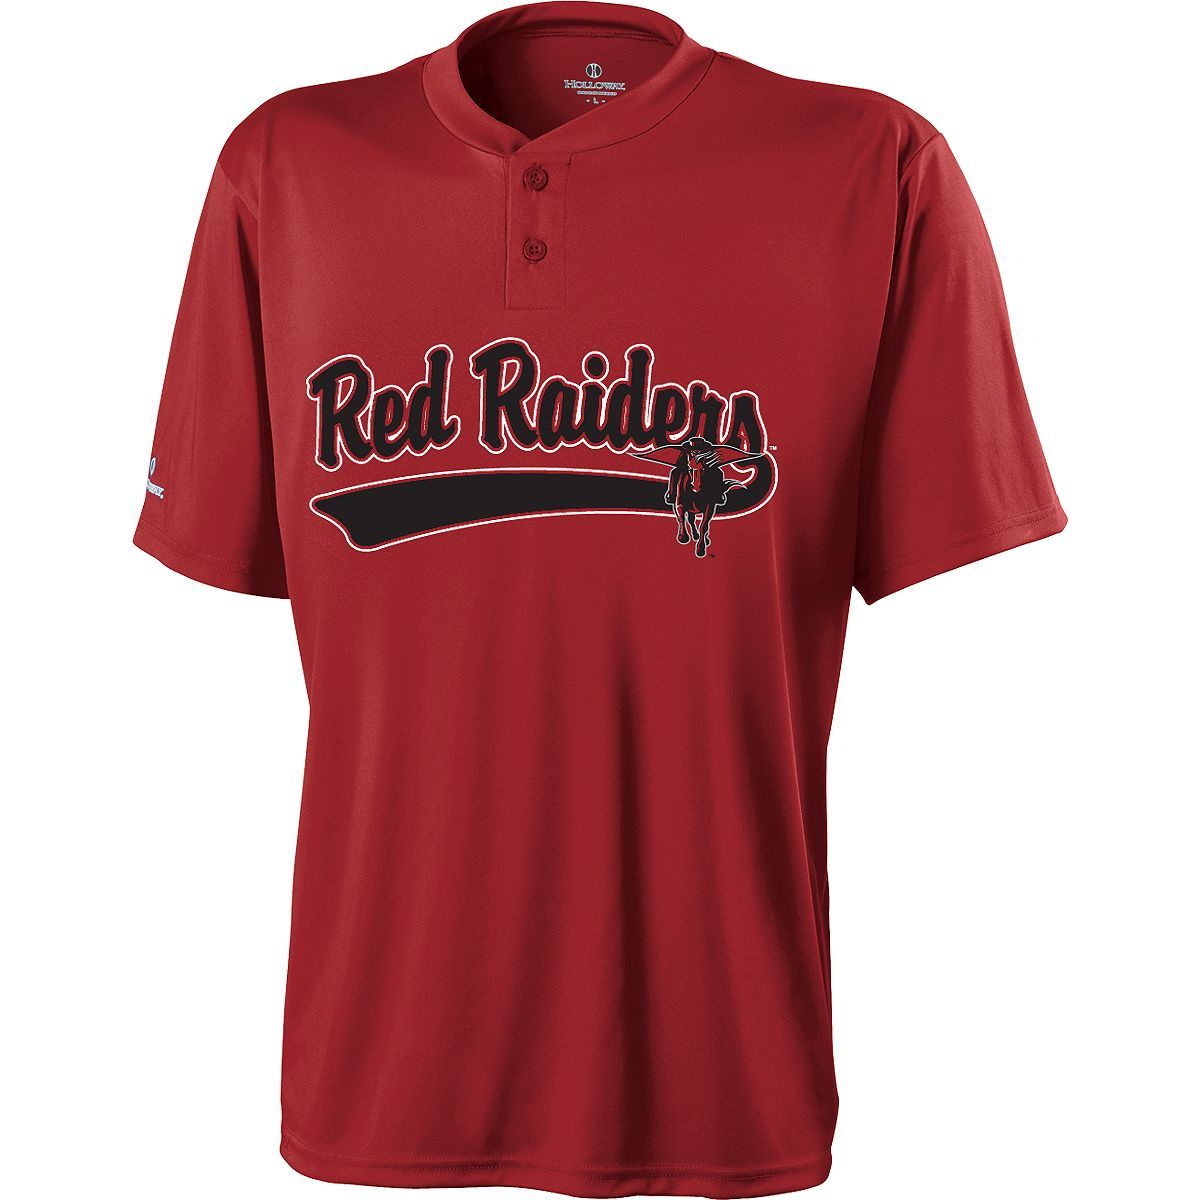 Holloway Cyr Adult Ball Park Jersey in Texas Tech  -Part of the Adult, Adult-Jersey, Holloway, Shirts product lines at KanaleyCreations.com